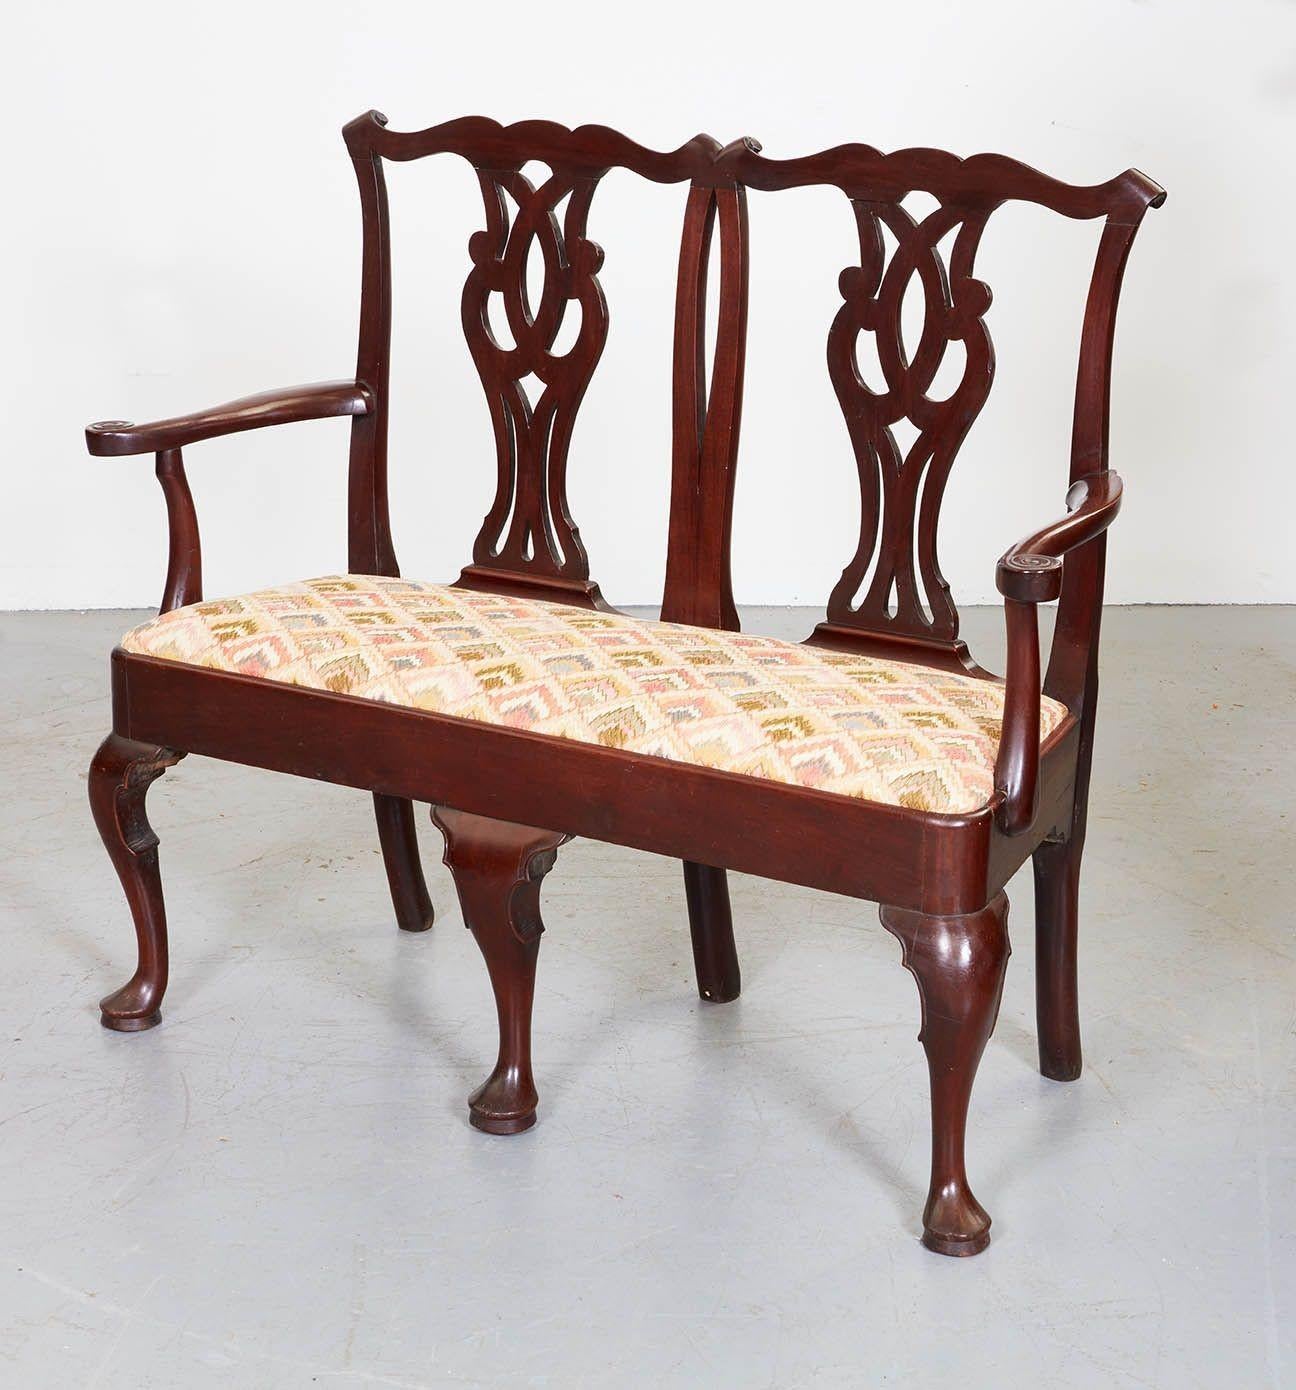 An 18th century mahogany settee having double Chippendale chair backsplats on rectangular padded seat with scrolled arms over three front cabriole legs ending in pad feet and continuous back rail legs. Later seat covering. The maker of this piece